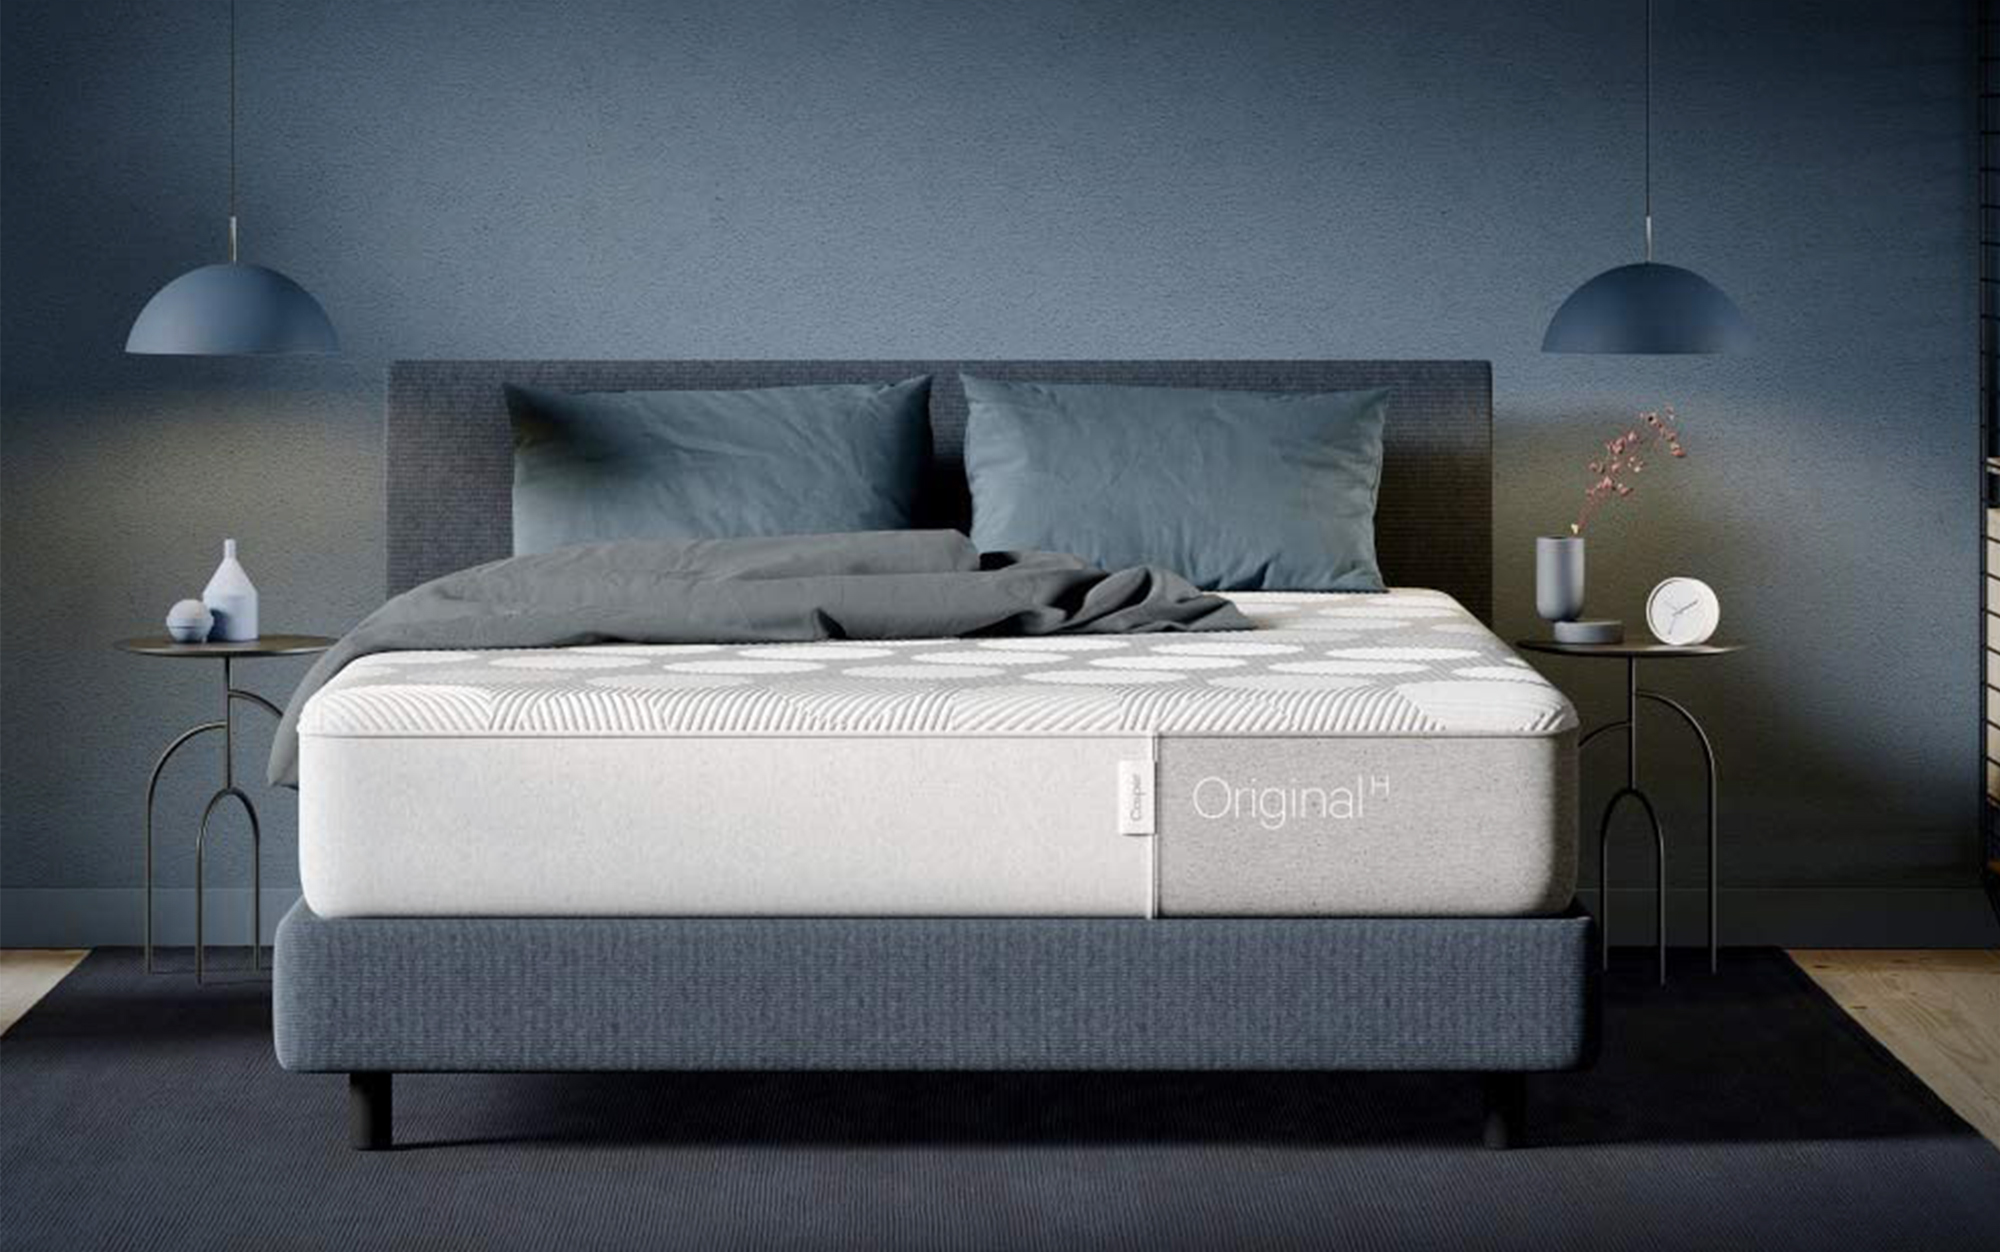 Sleep easy with this Casper mattress Memorial Day sale on Amazon, if you hurry